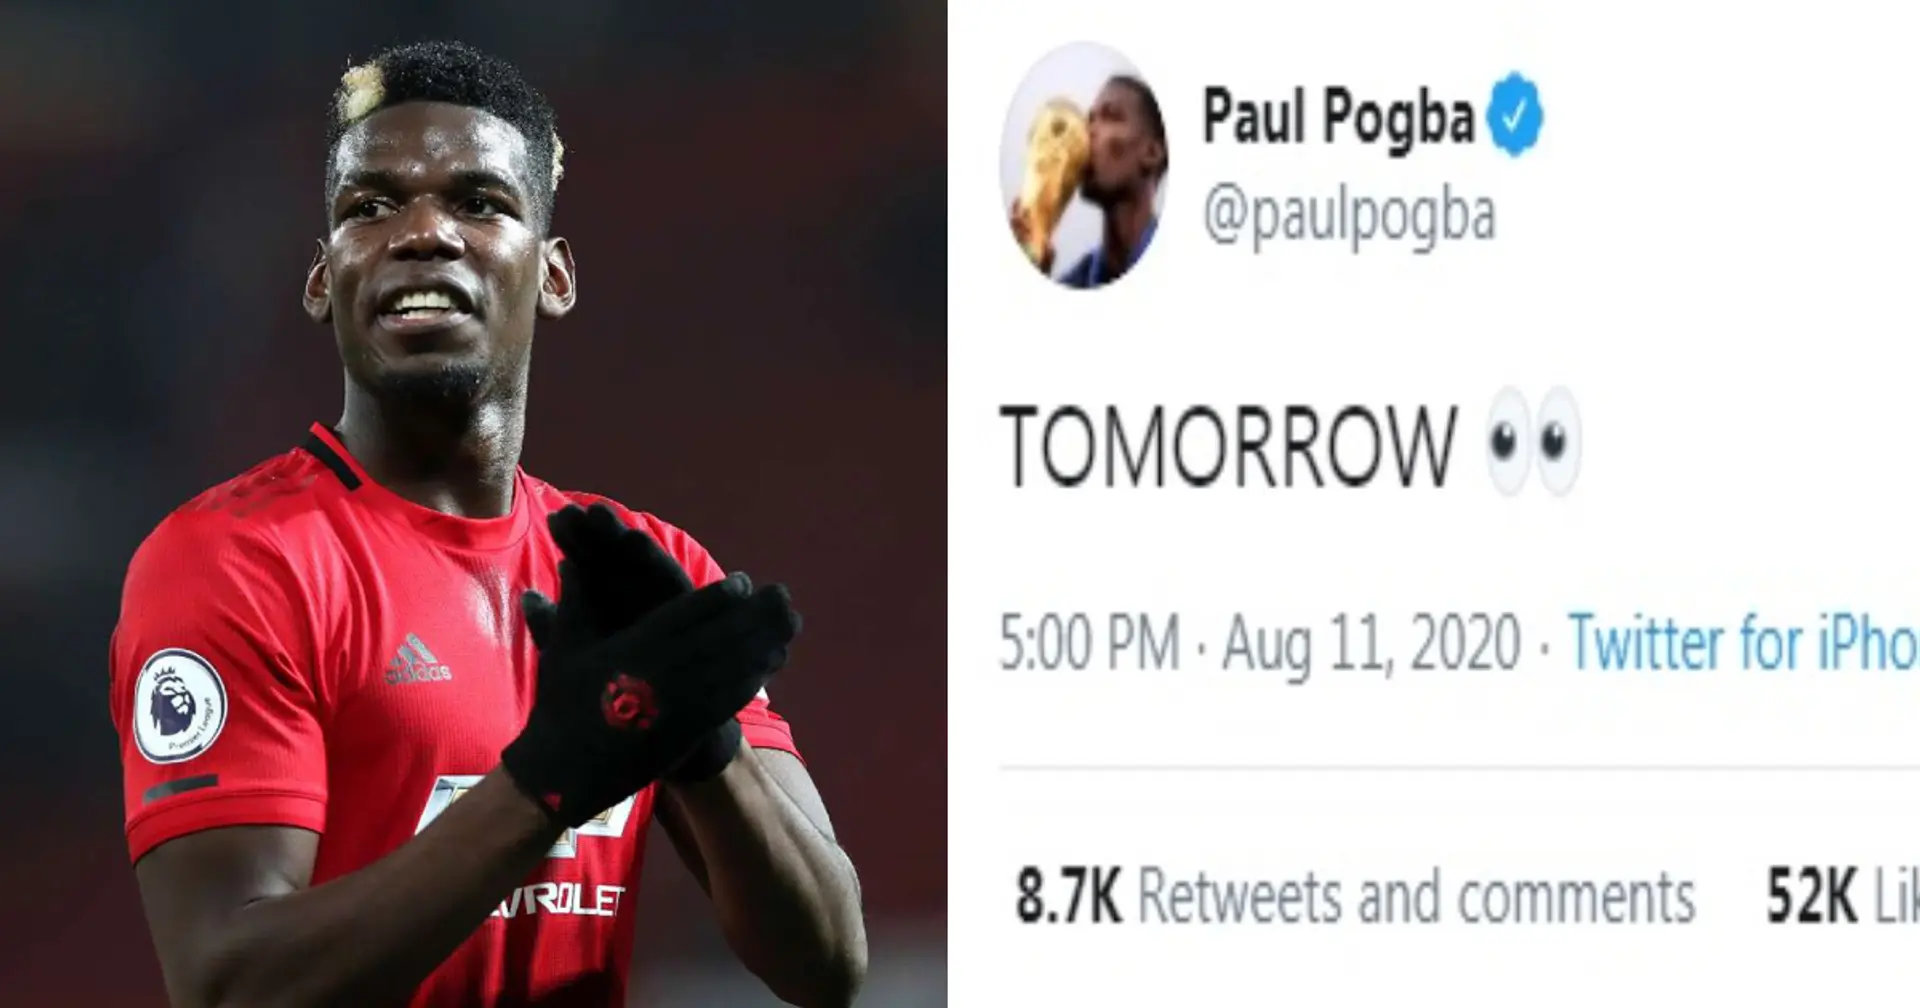 Paul Pogba takes to social media to cryptically tease special announcement